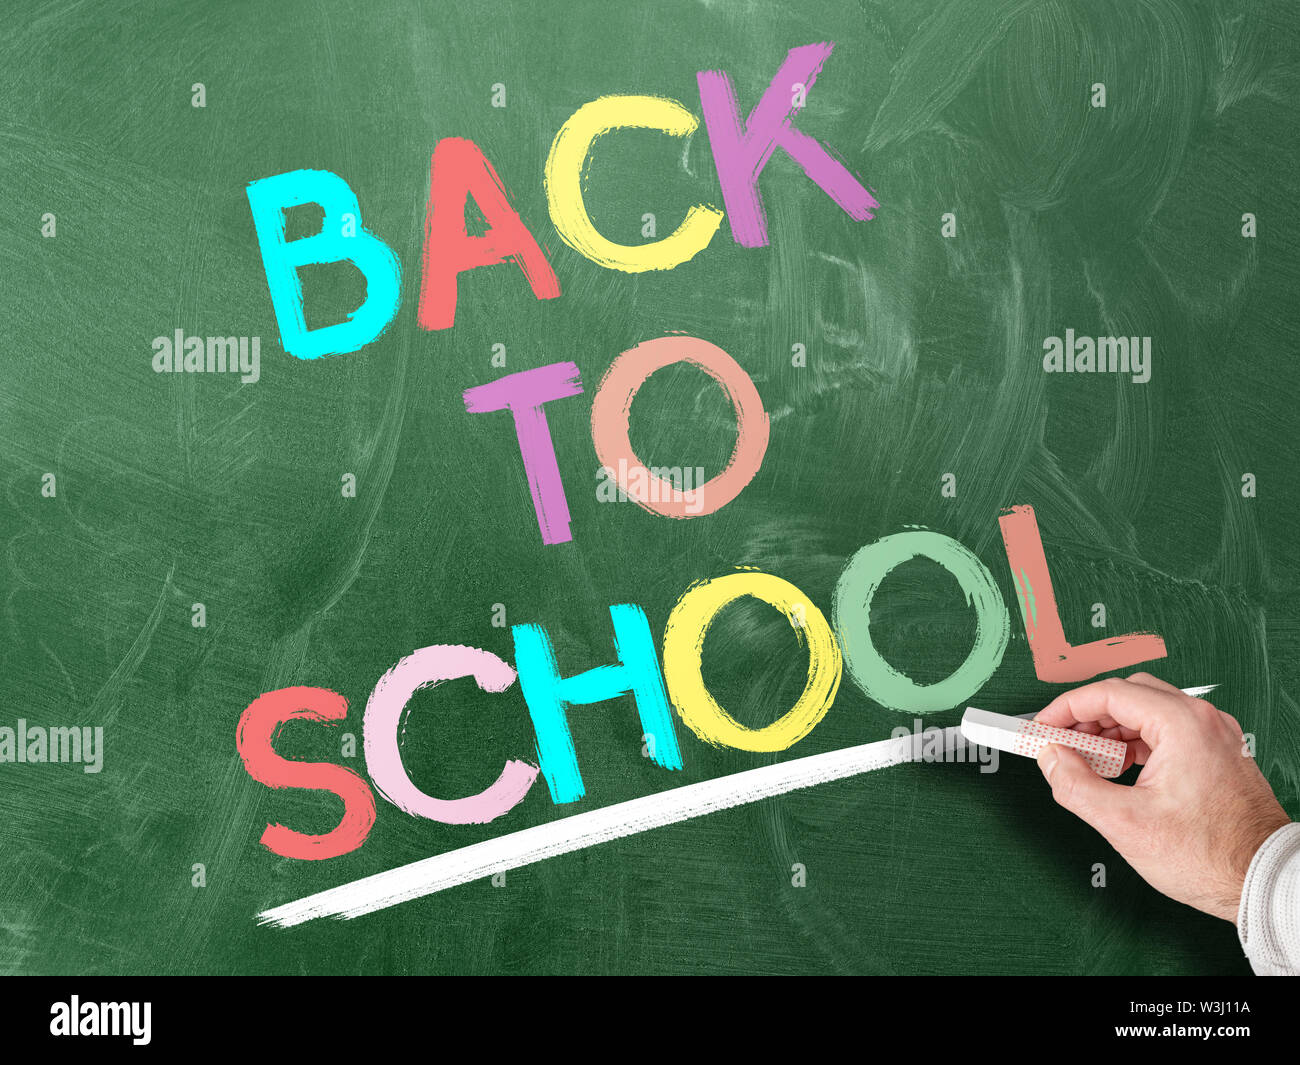 hand holding piece of chalk against colorful words BACK TO SCHOOL written on chalkboard Stock Photo